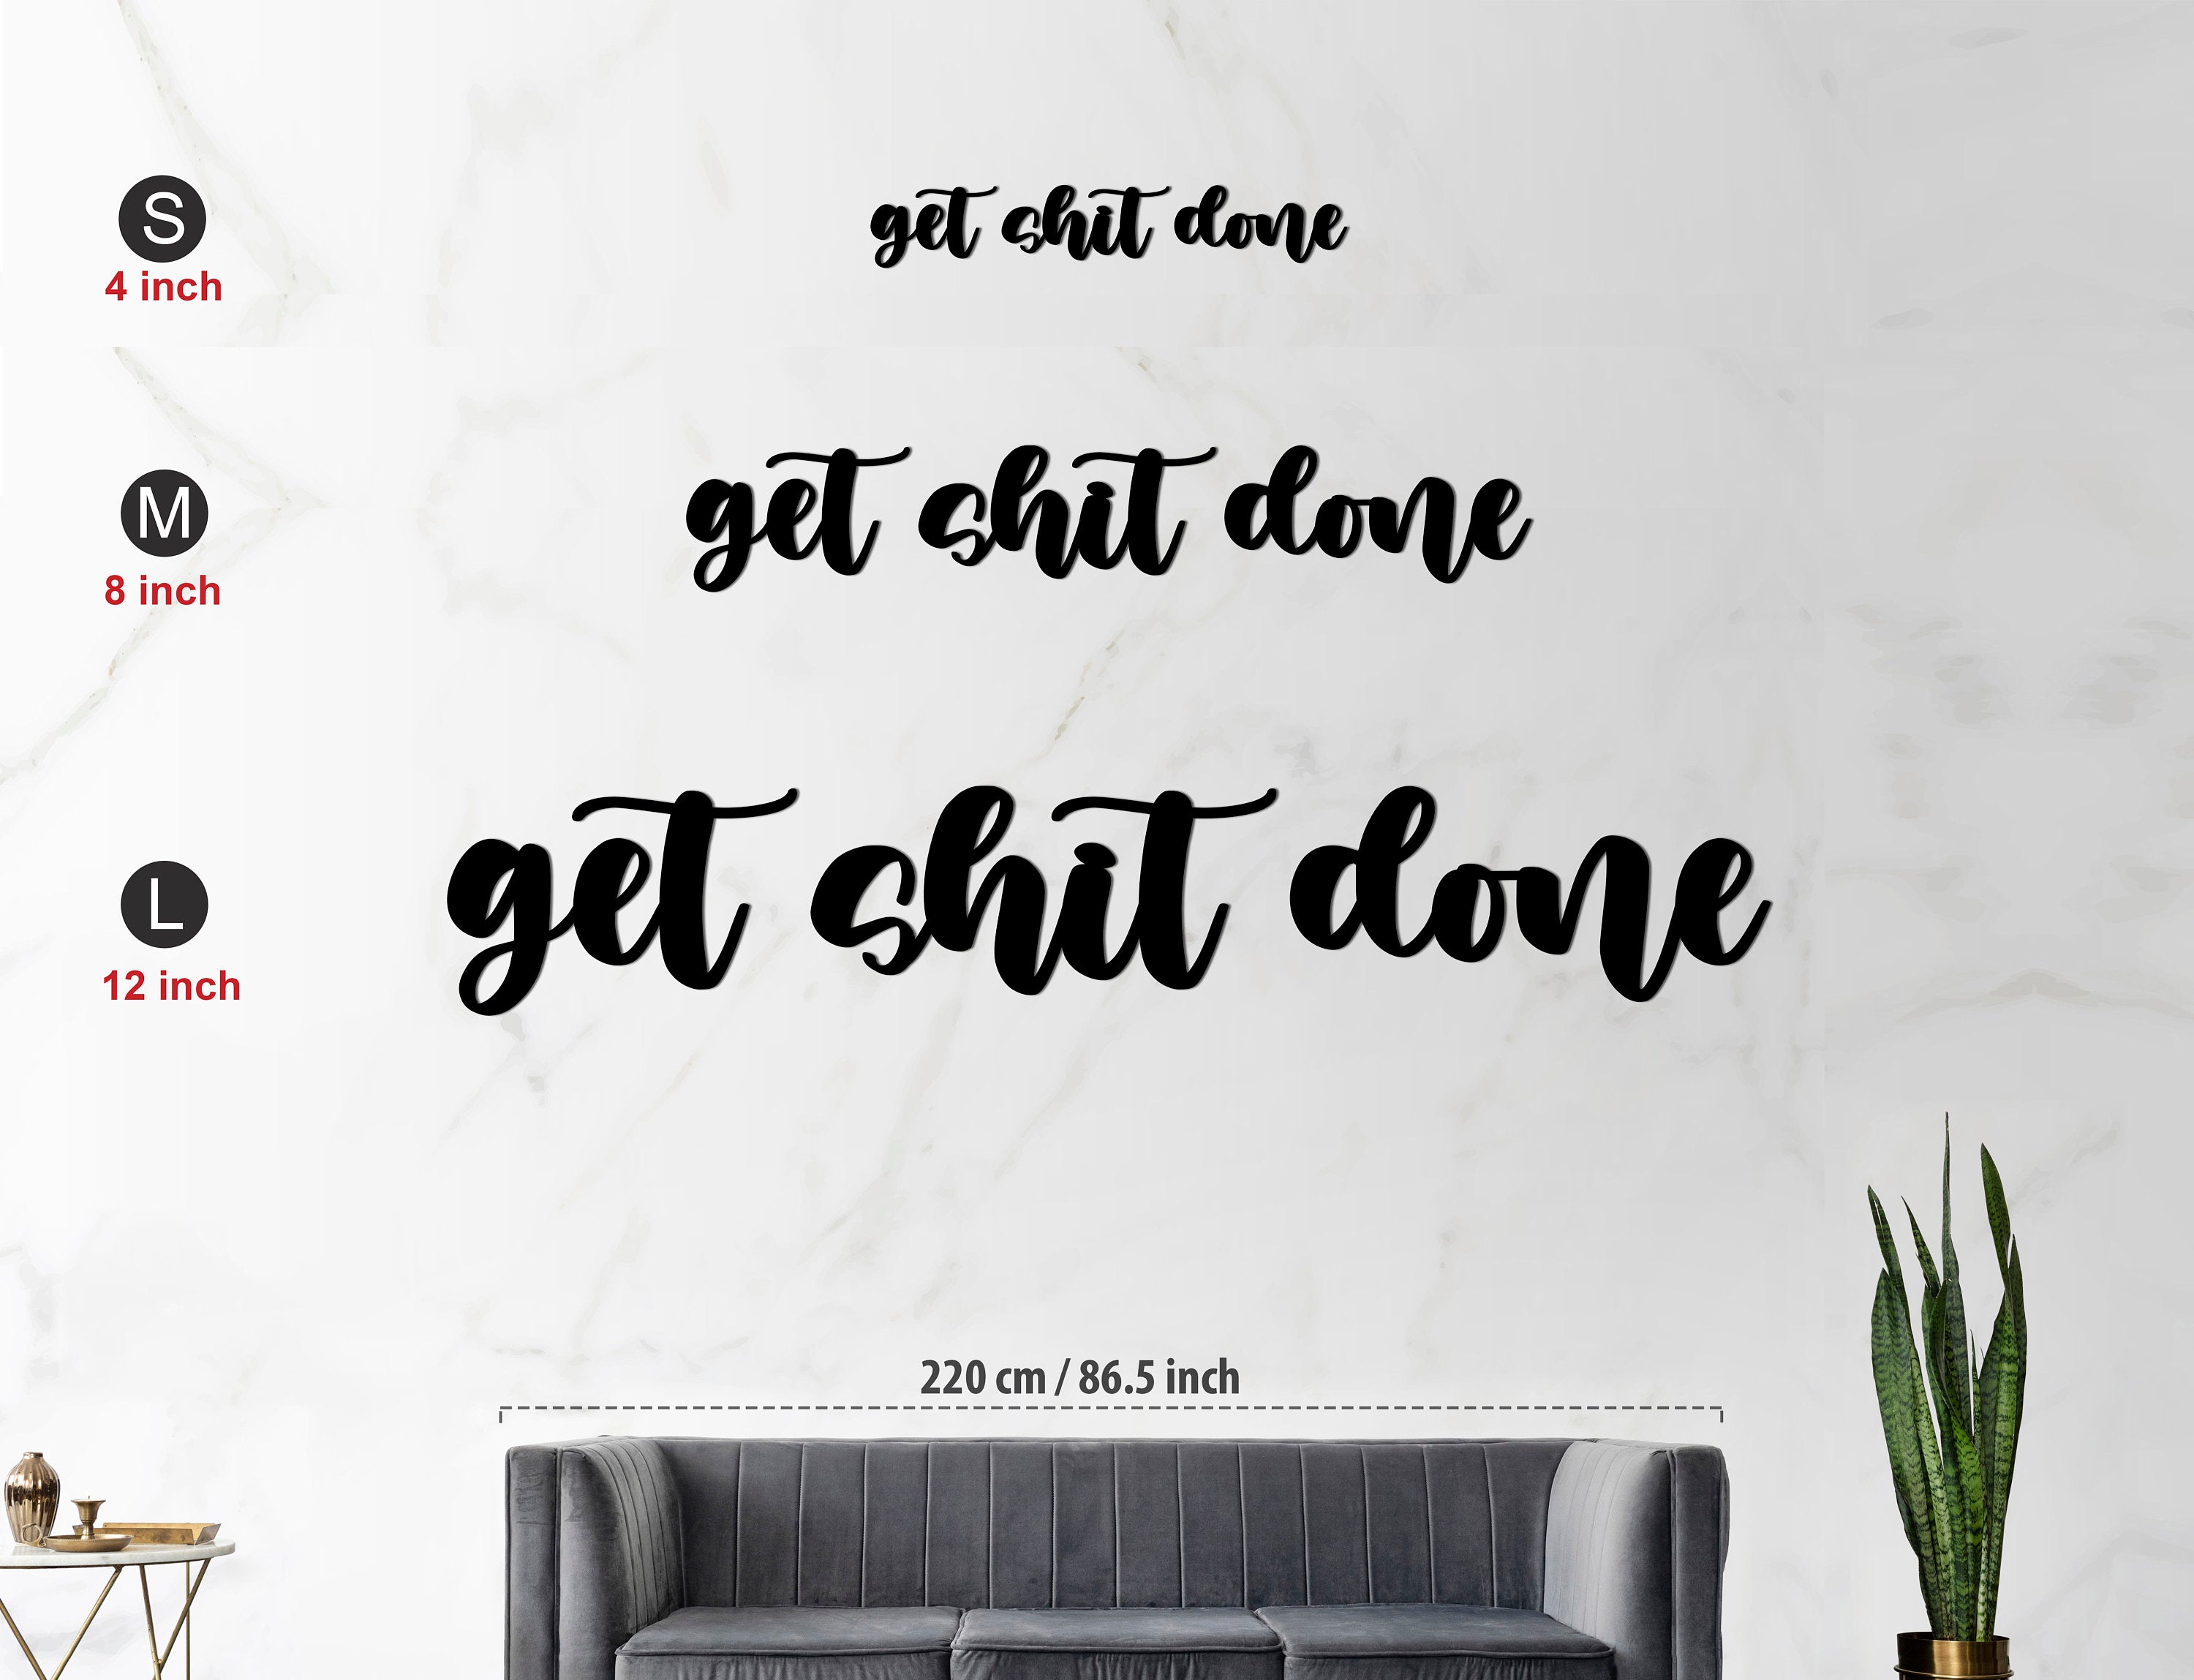 Metal Wall Home Decor, Get Shit Done Large Living Room Decor, Interior Metal Wall Sign, Small Quote Art, Metal Wall Decor